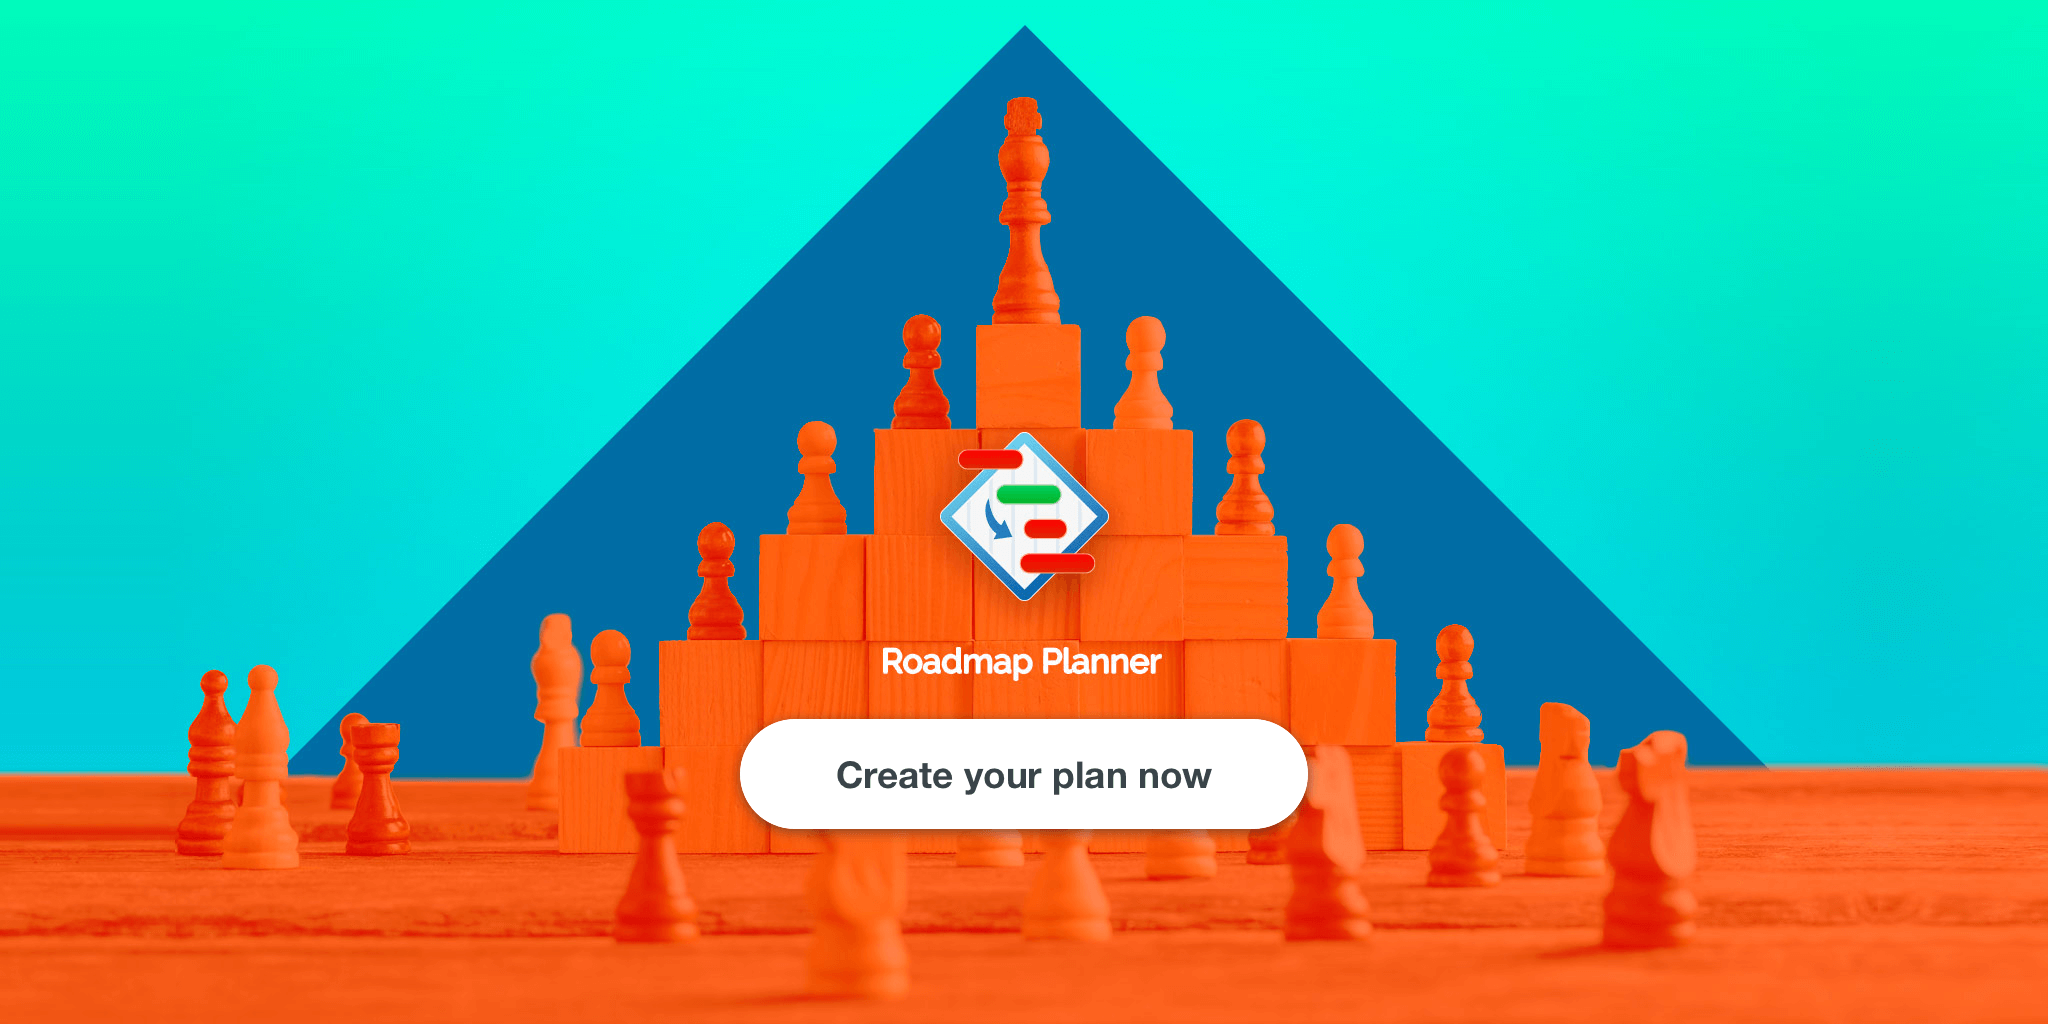 Build your business strategy with Roadmap Planner